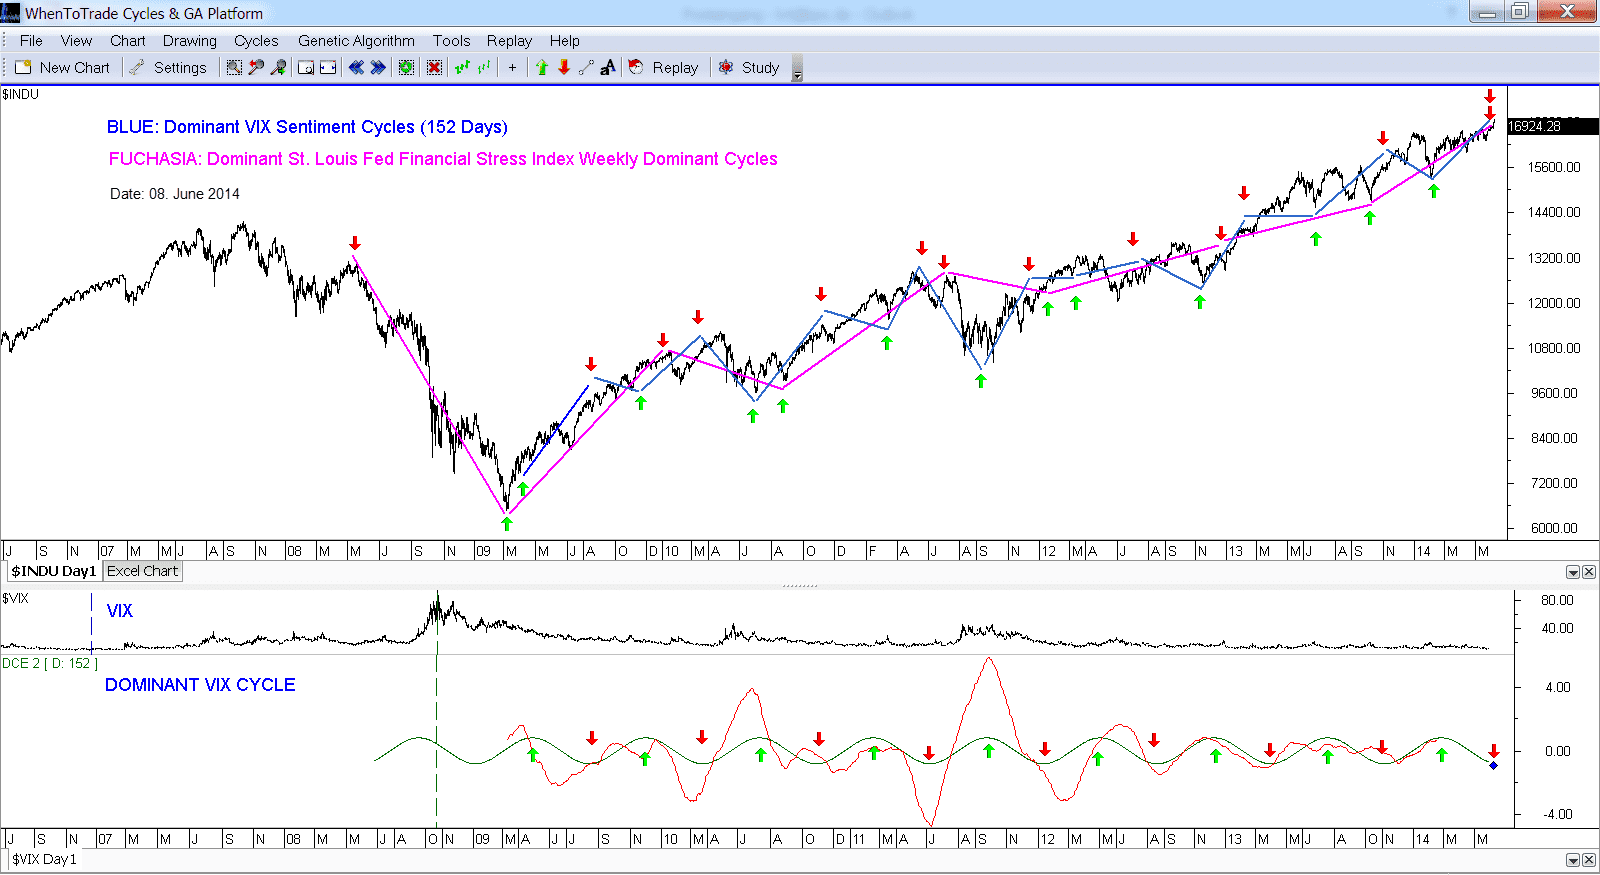 VIX and Financial Stress Index Dominant Cycle View